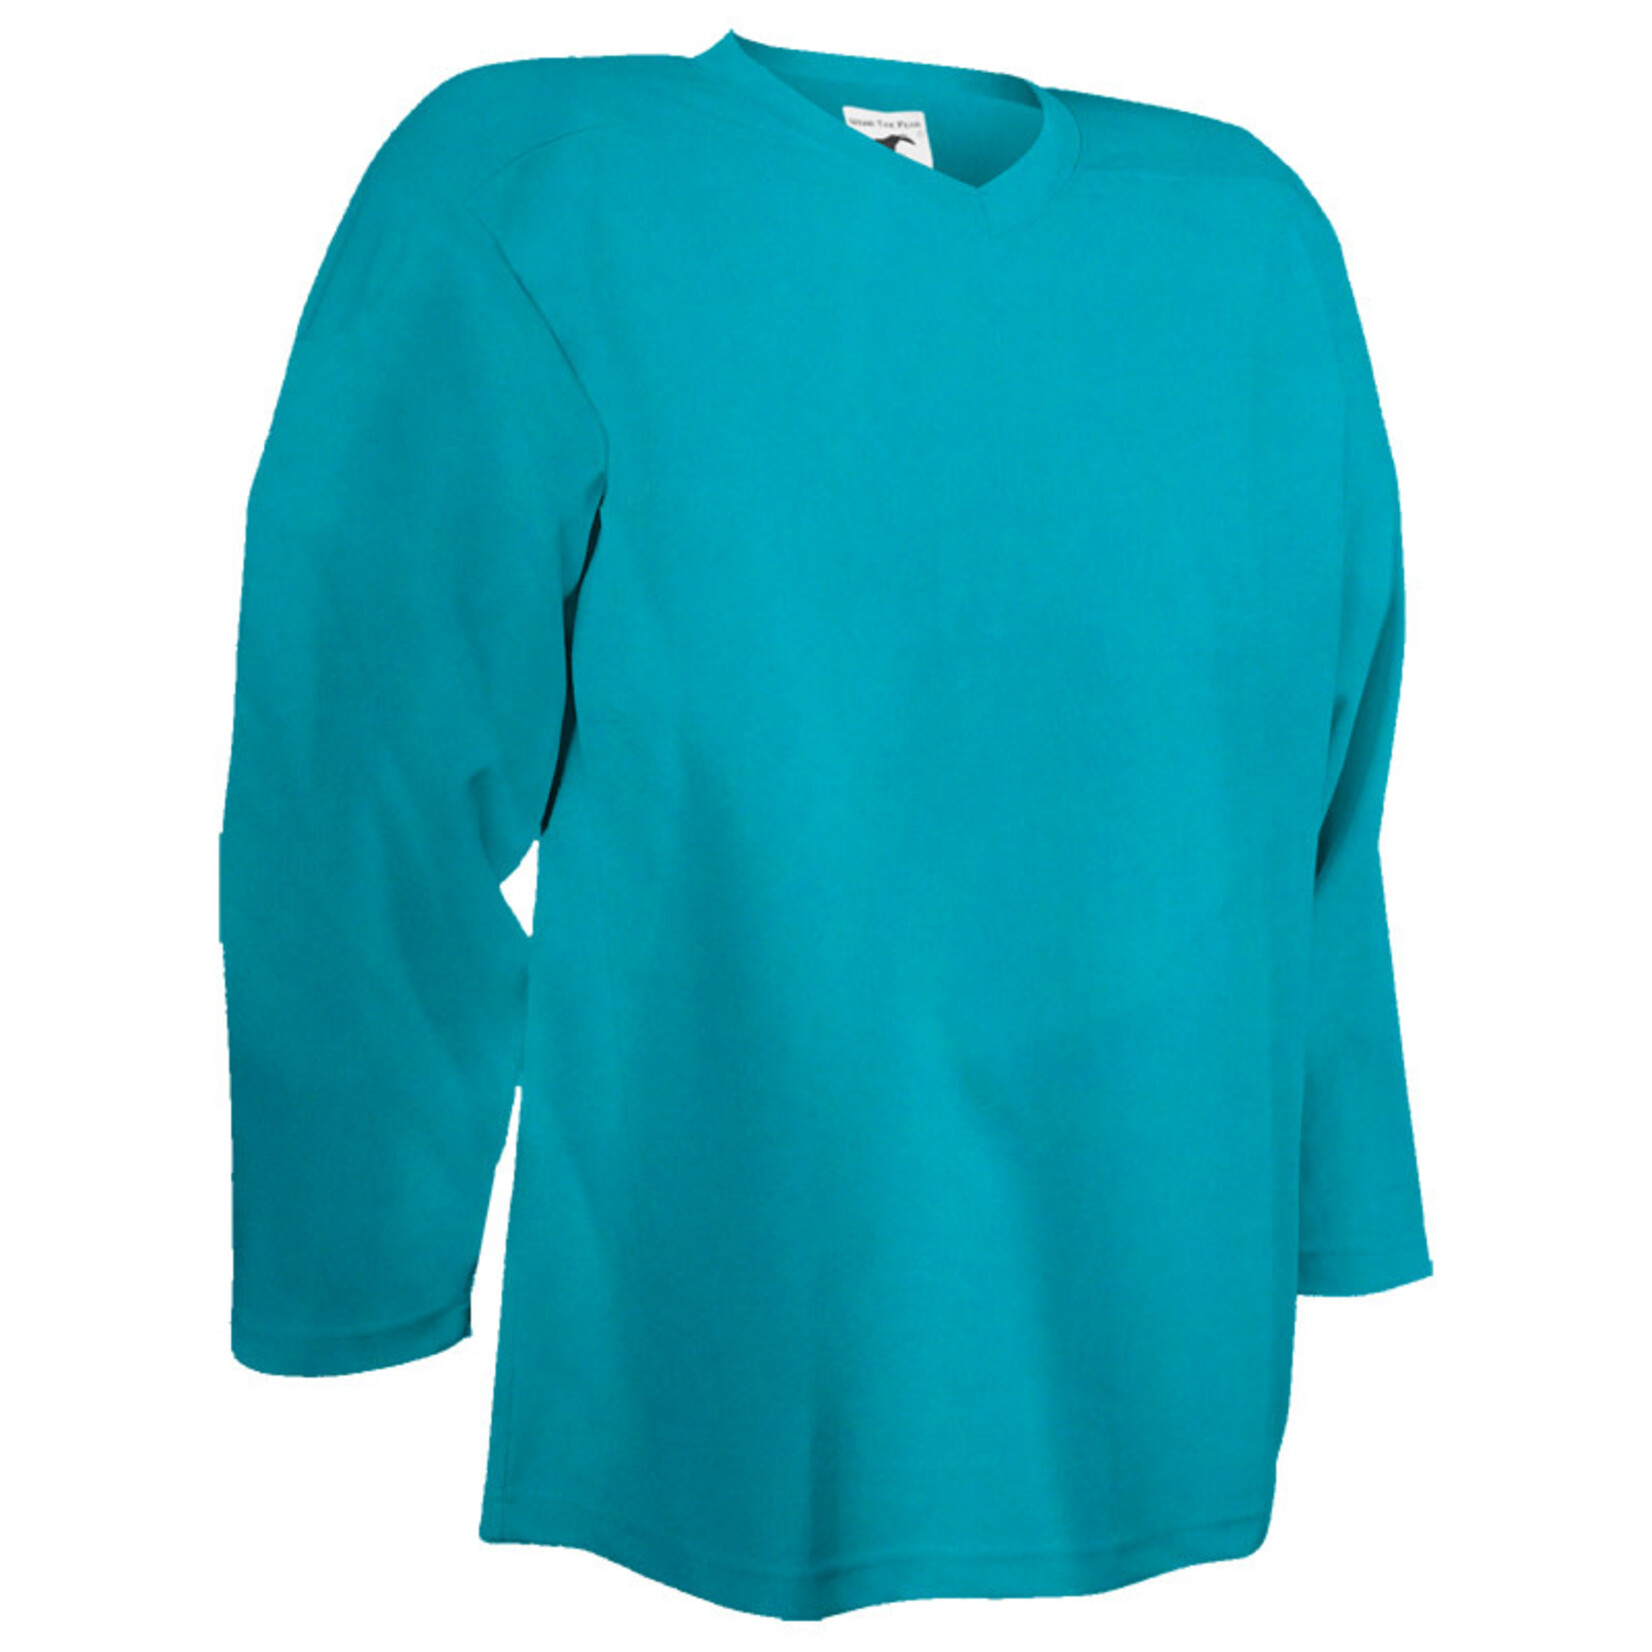 Pear Sox Pear Sox Air Mesh Practice Jersey (YOUTH TEAL)